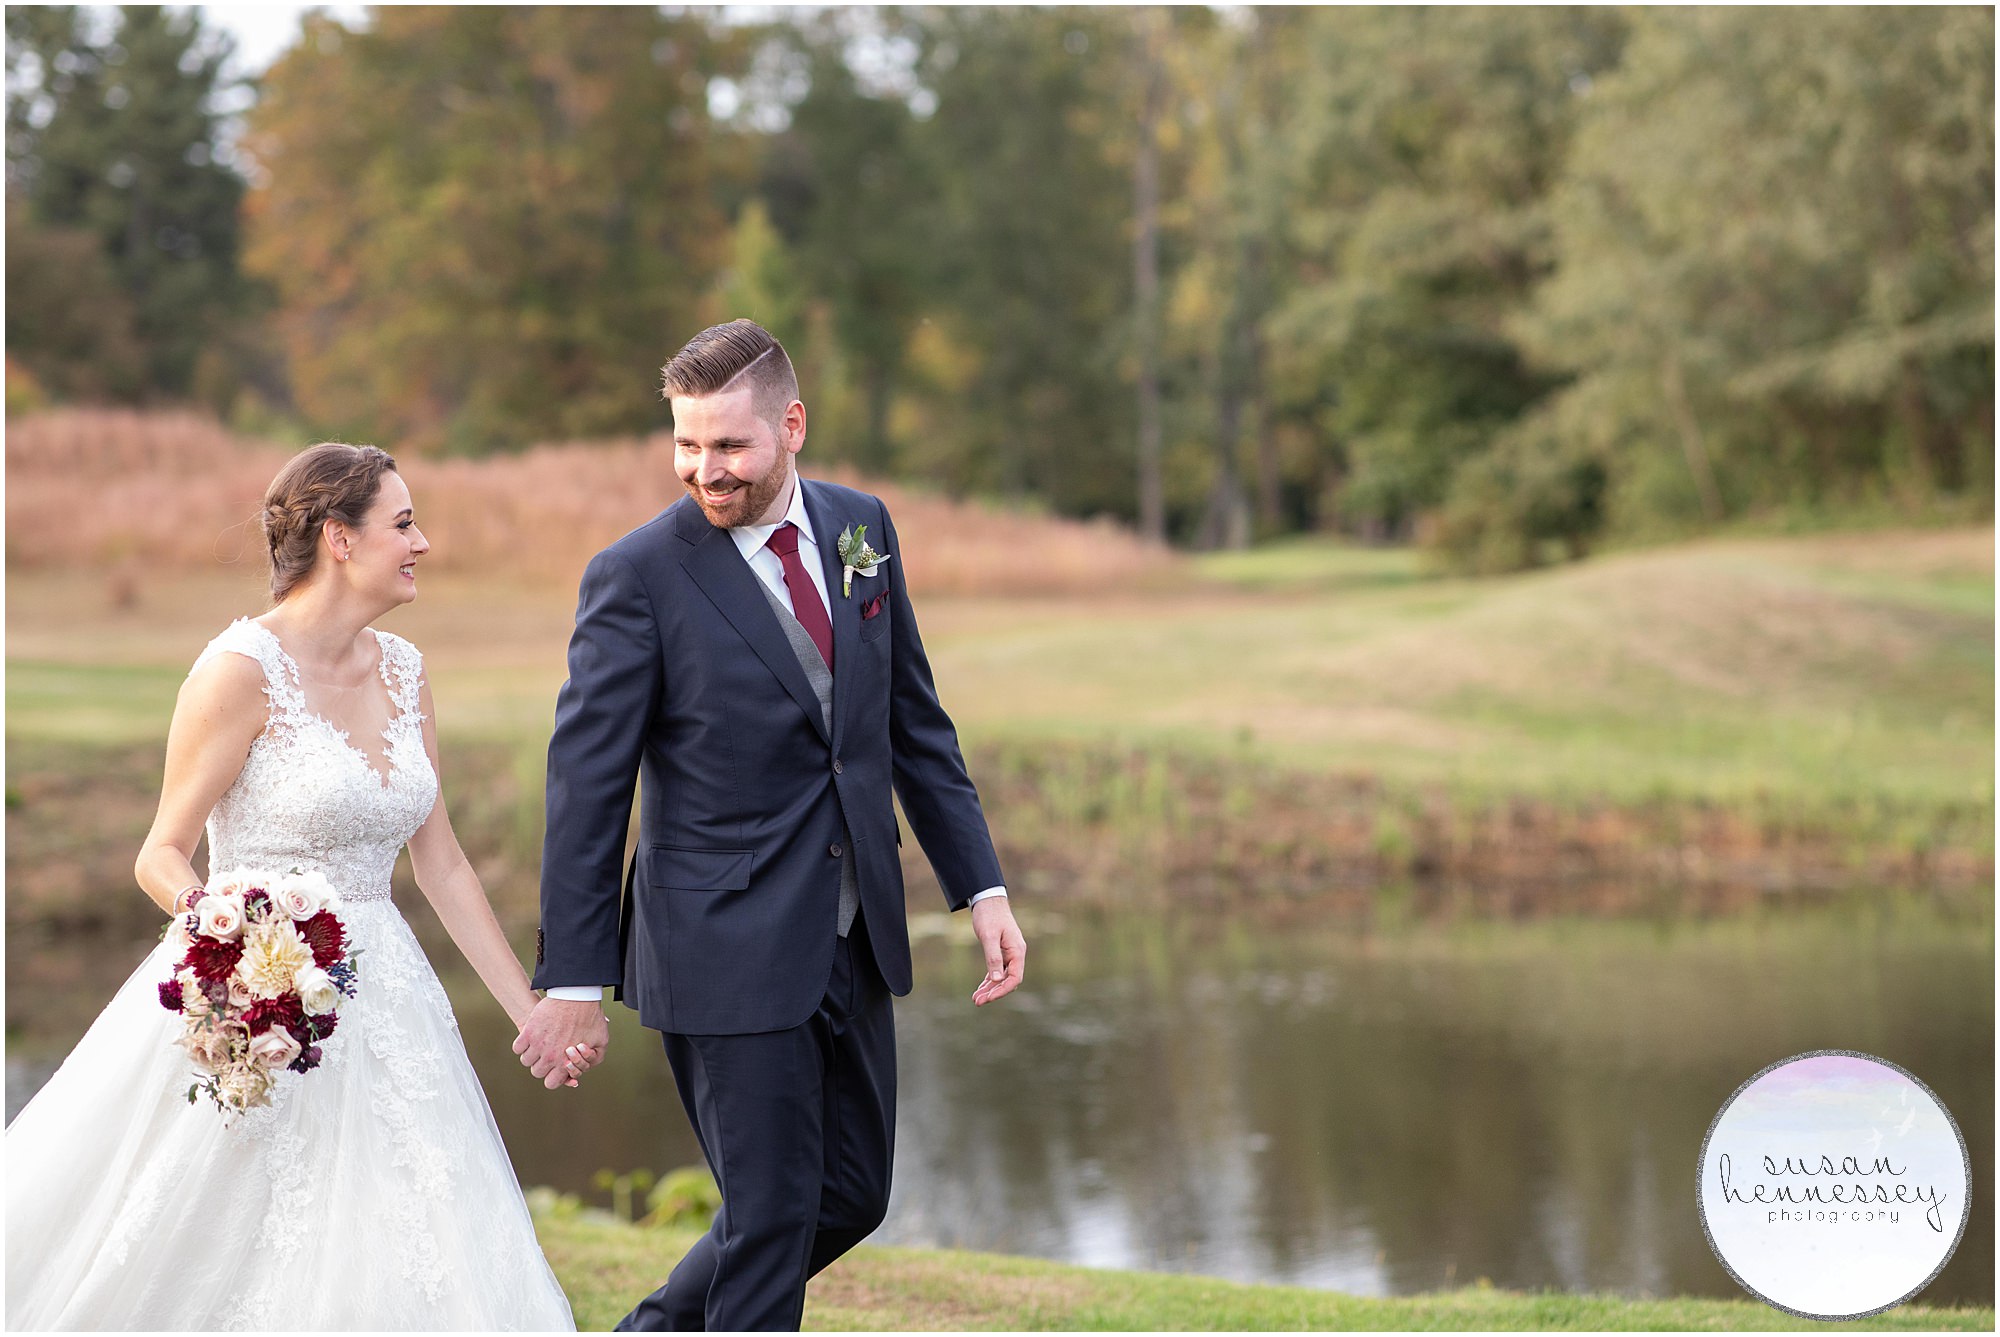 Candice and Jon had a Fall Wedding at Old York Country Club